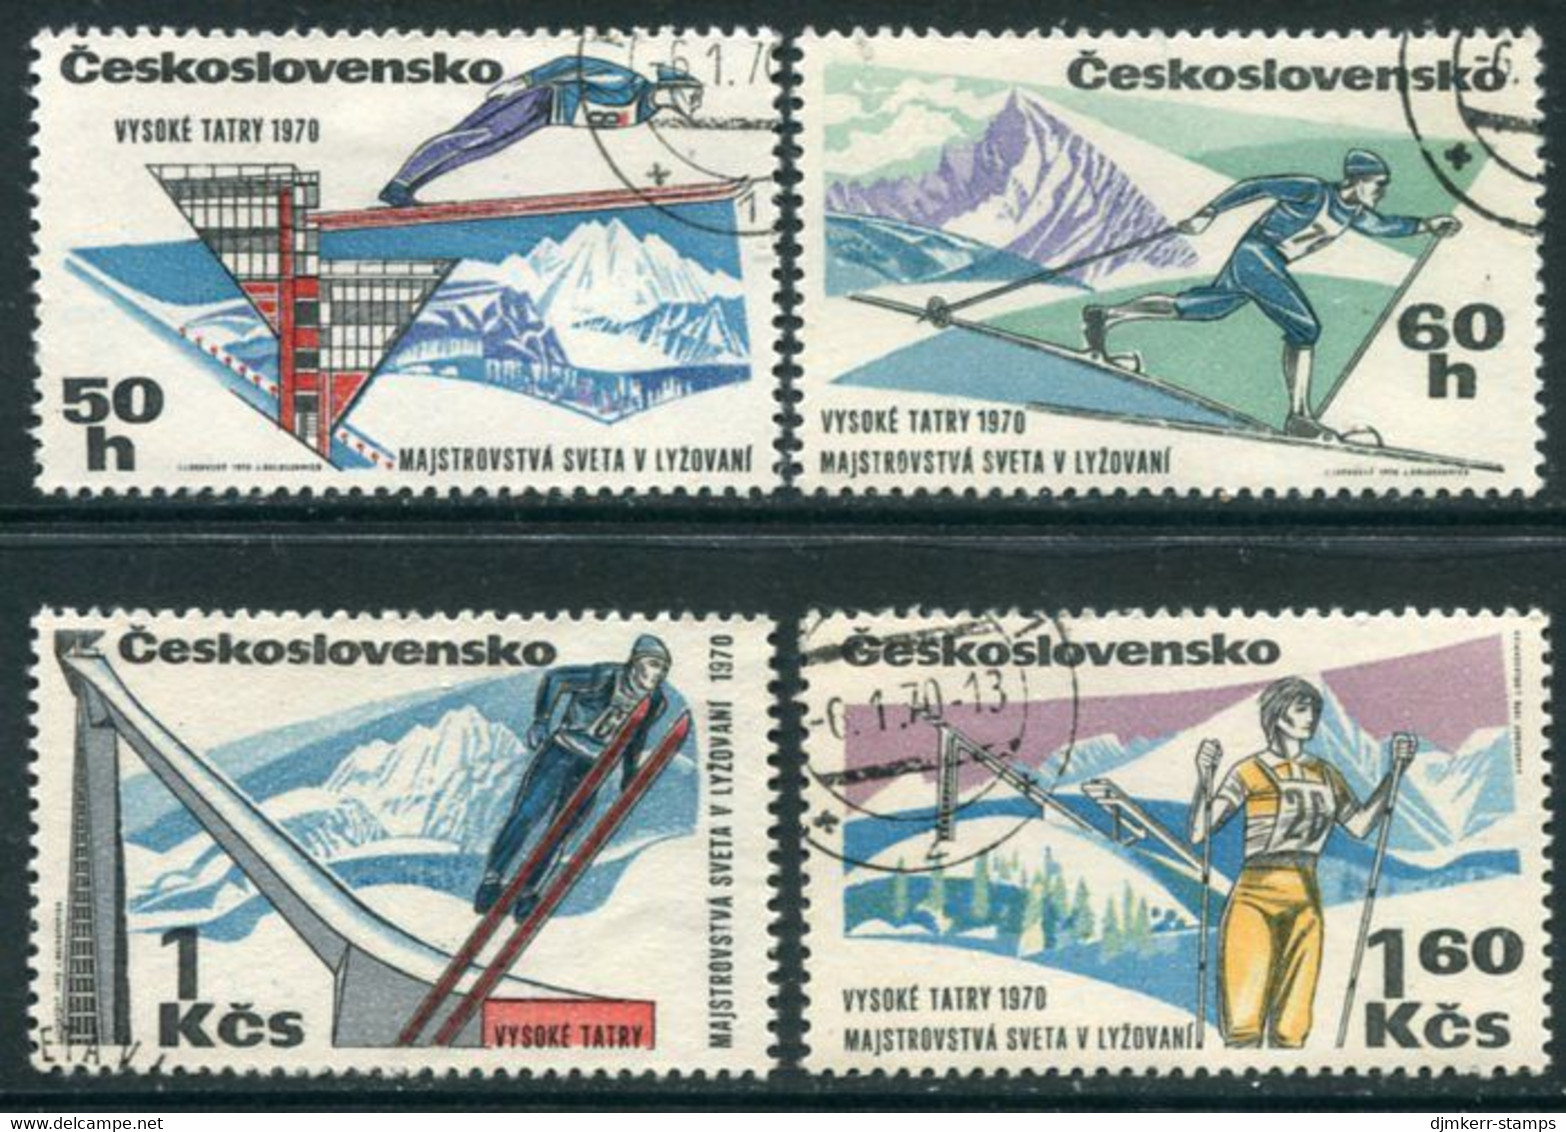 CZECHOSLOVAKIA 1970 Skiing World Championship Used Michel 1916-18 - Used Stamps